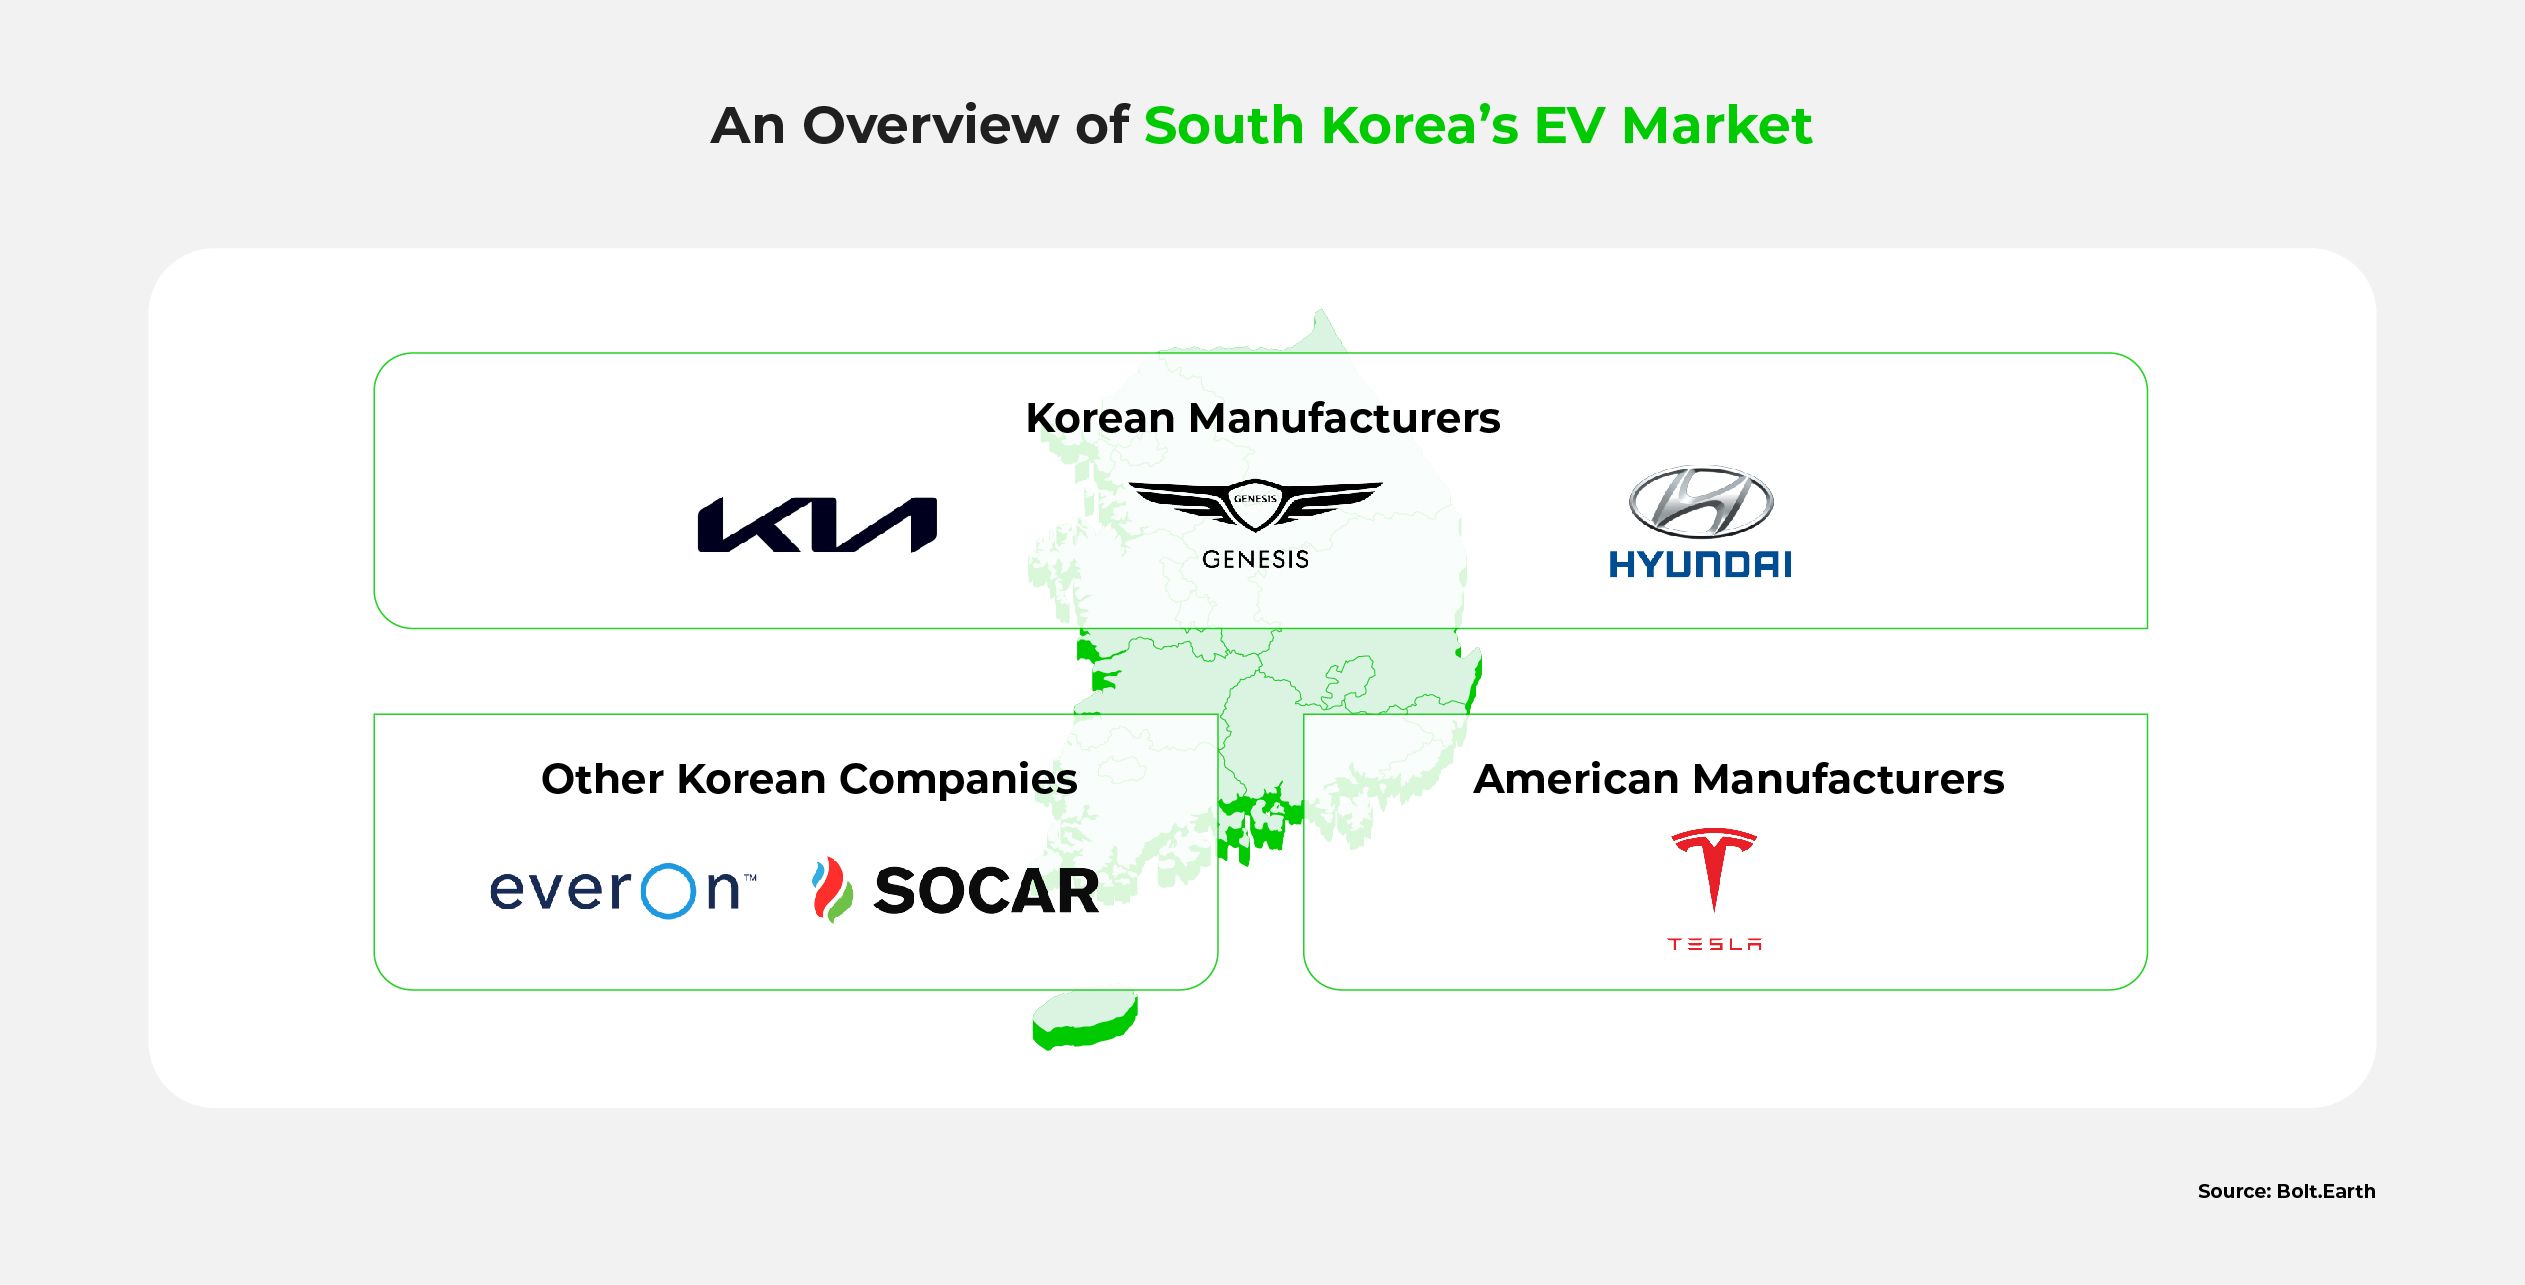 A graphic listing major players in the South Korean EV market